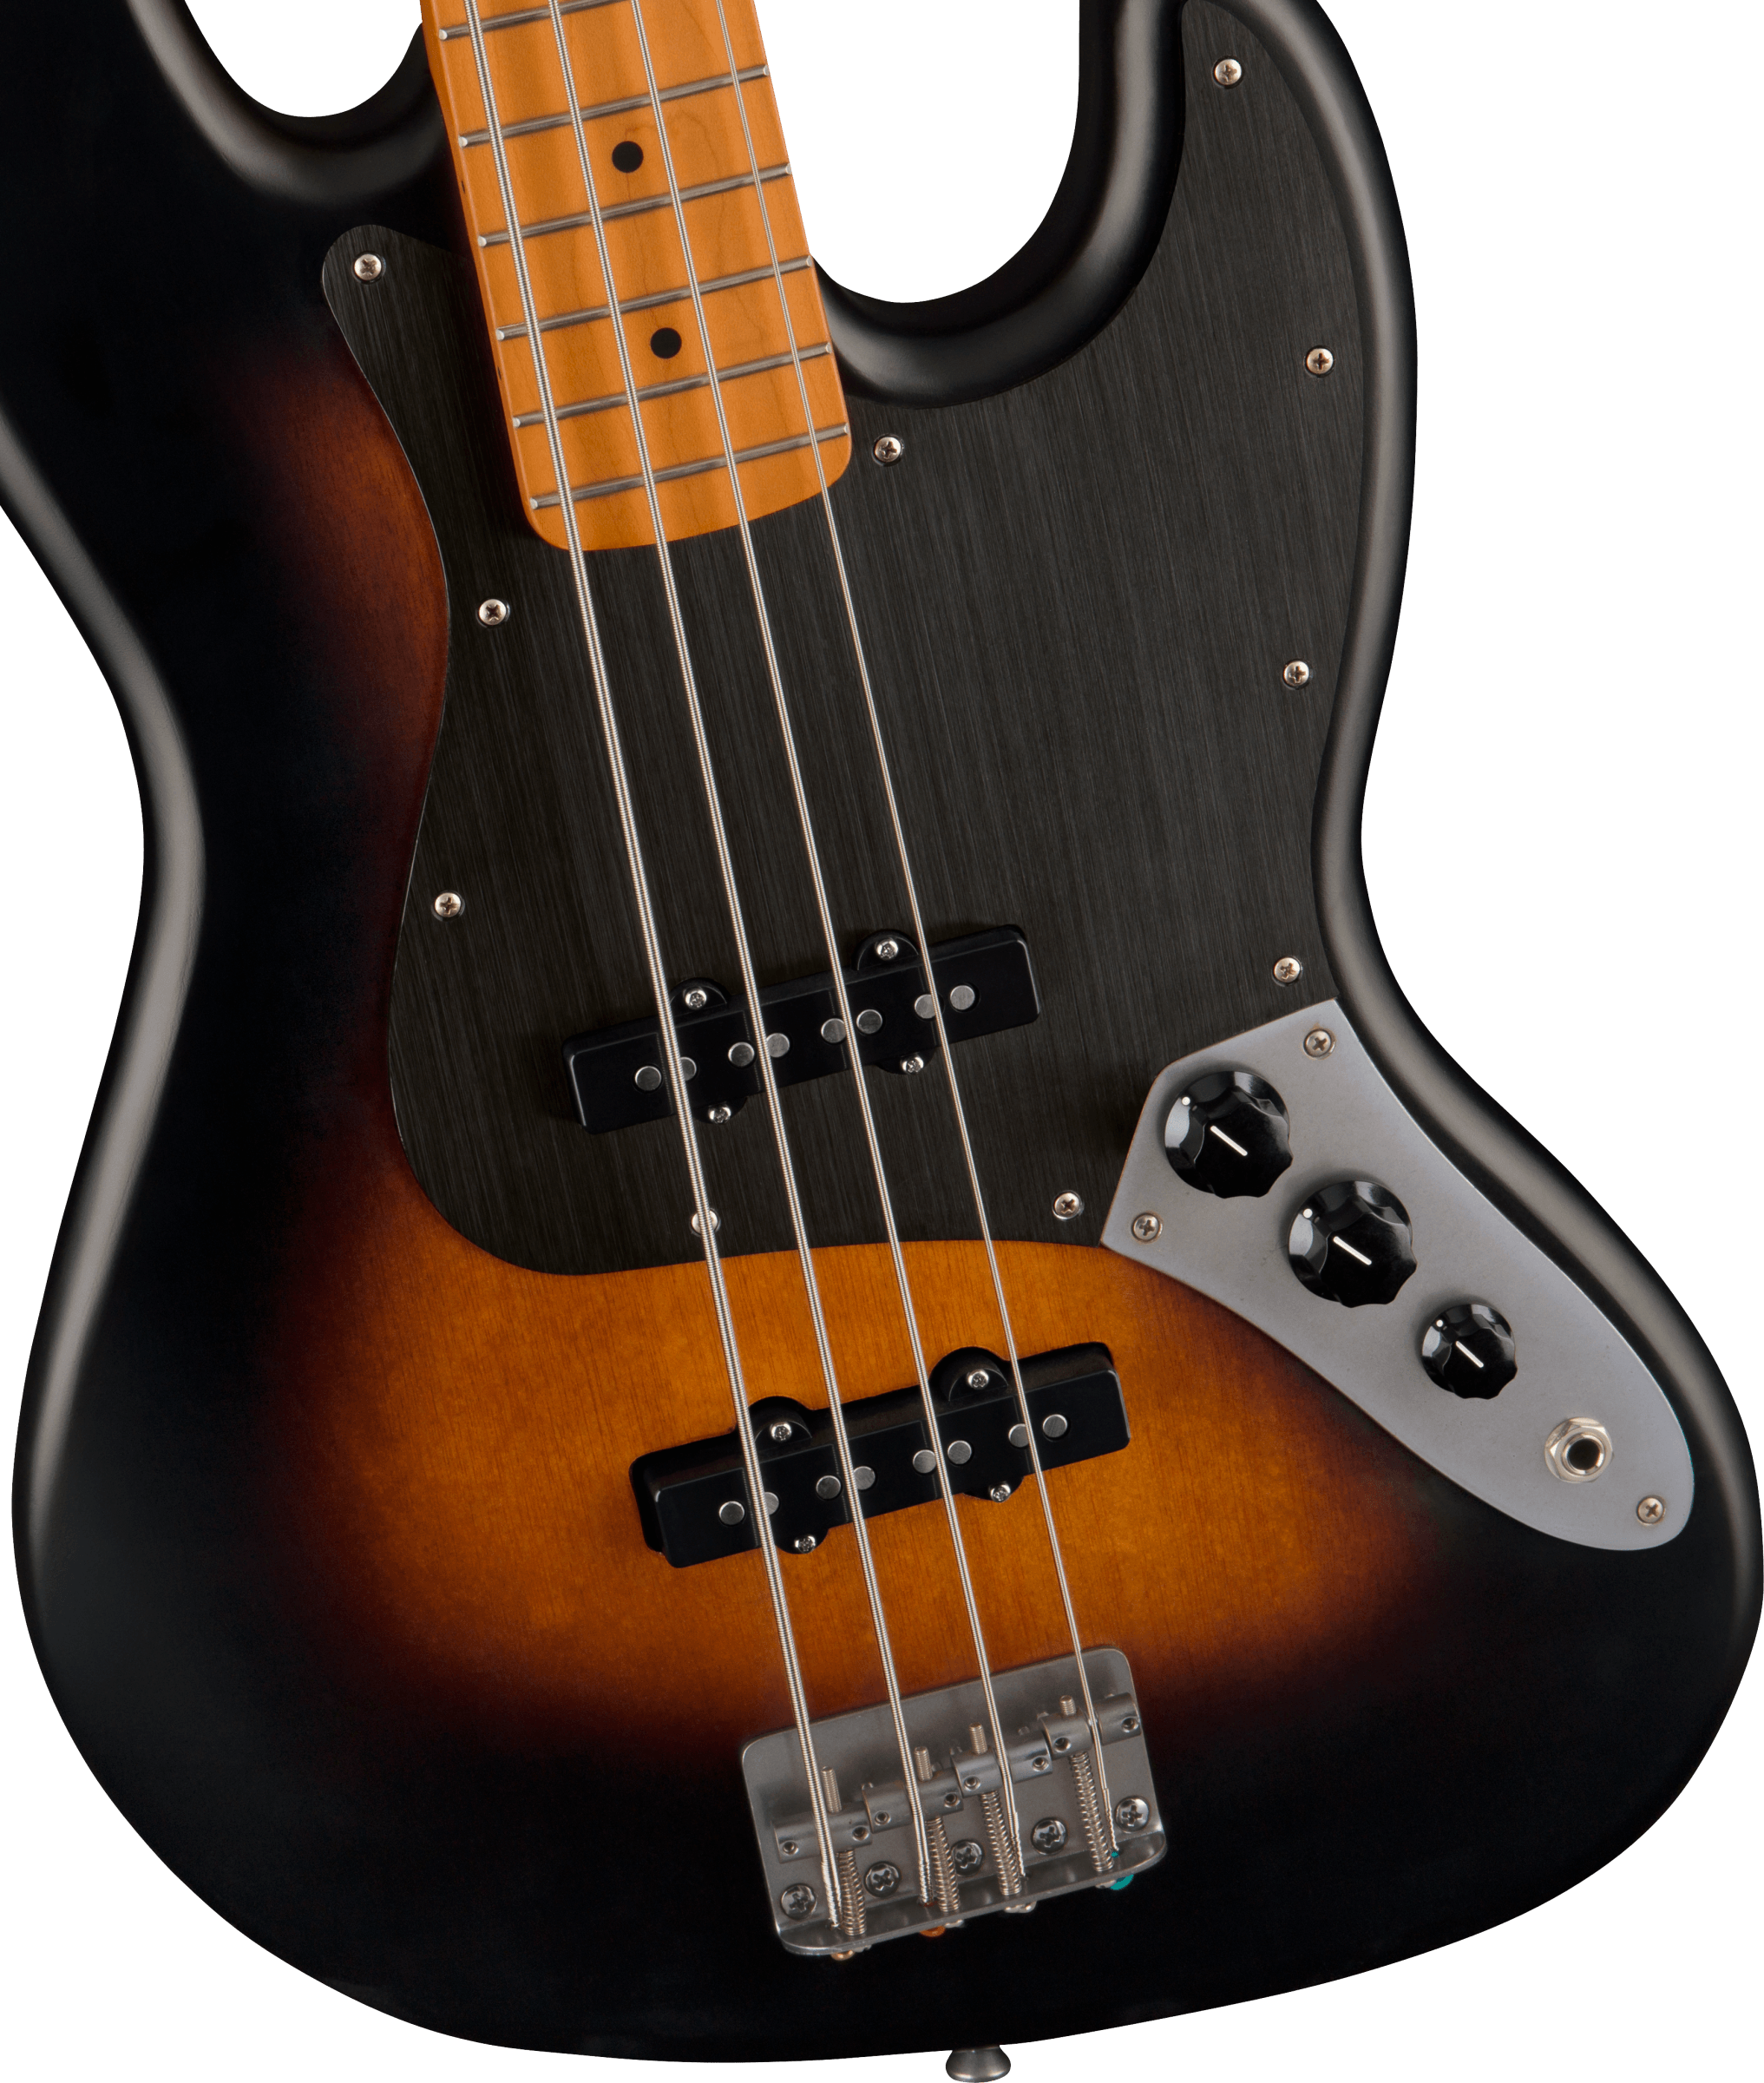 Squier Jazz Bass 40th Anniversary Gold Edition Mn - Satin Wide 2-color Sunburst - Solid body electric bass - Variation 2